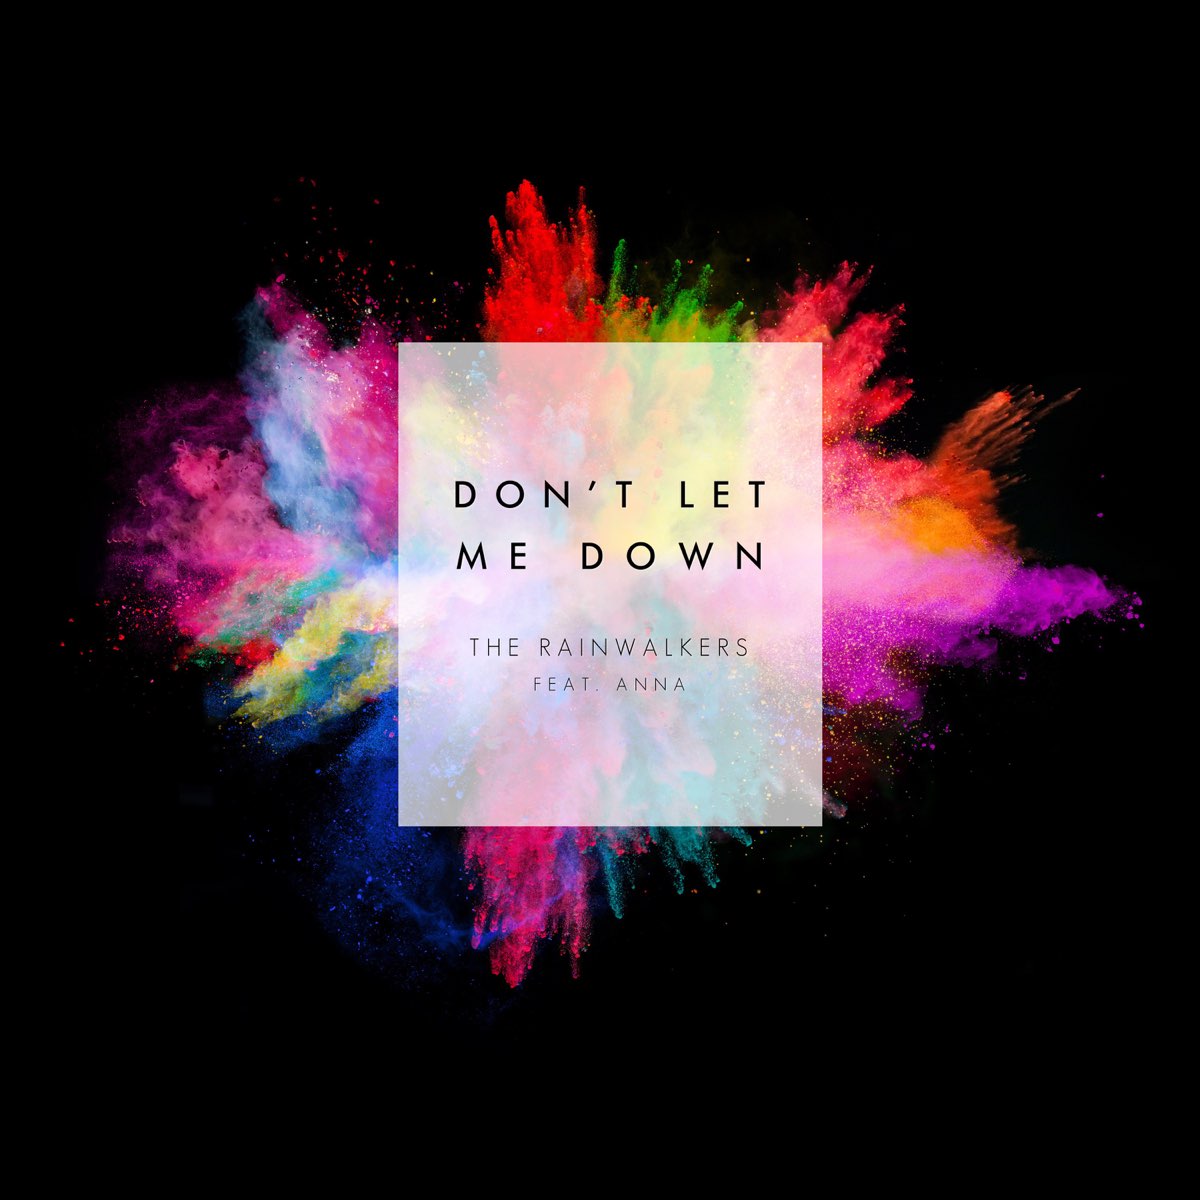 Don`t Let me down. The Chainsmokers don't Let me down. The Chainsmokers don't Let me down обложка. Don't Let me down Daya обложка. The chainsmokers feat daya don